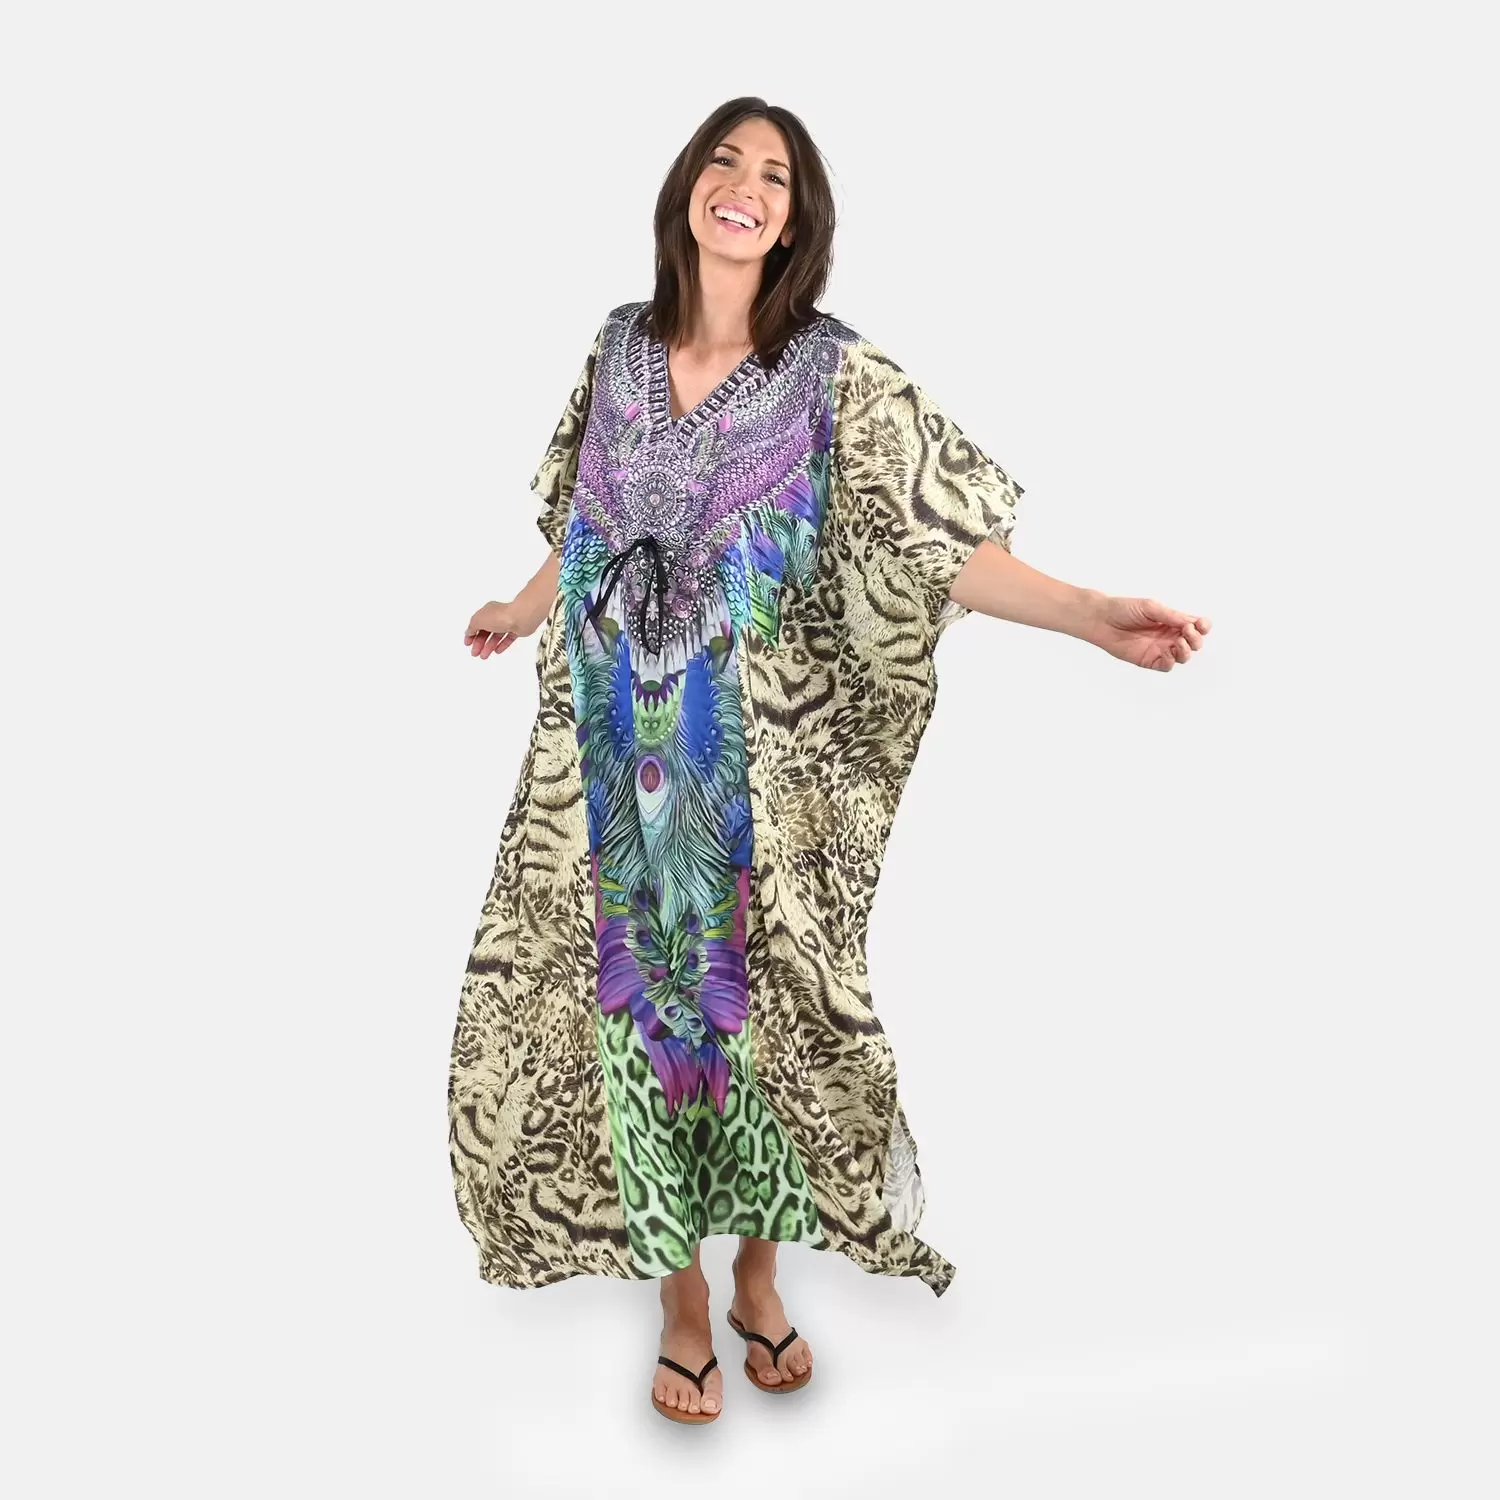 TAMSY Olive Animal Printed Long Kaftan with Drawstring – One Size Fits Most